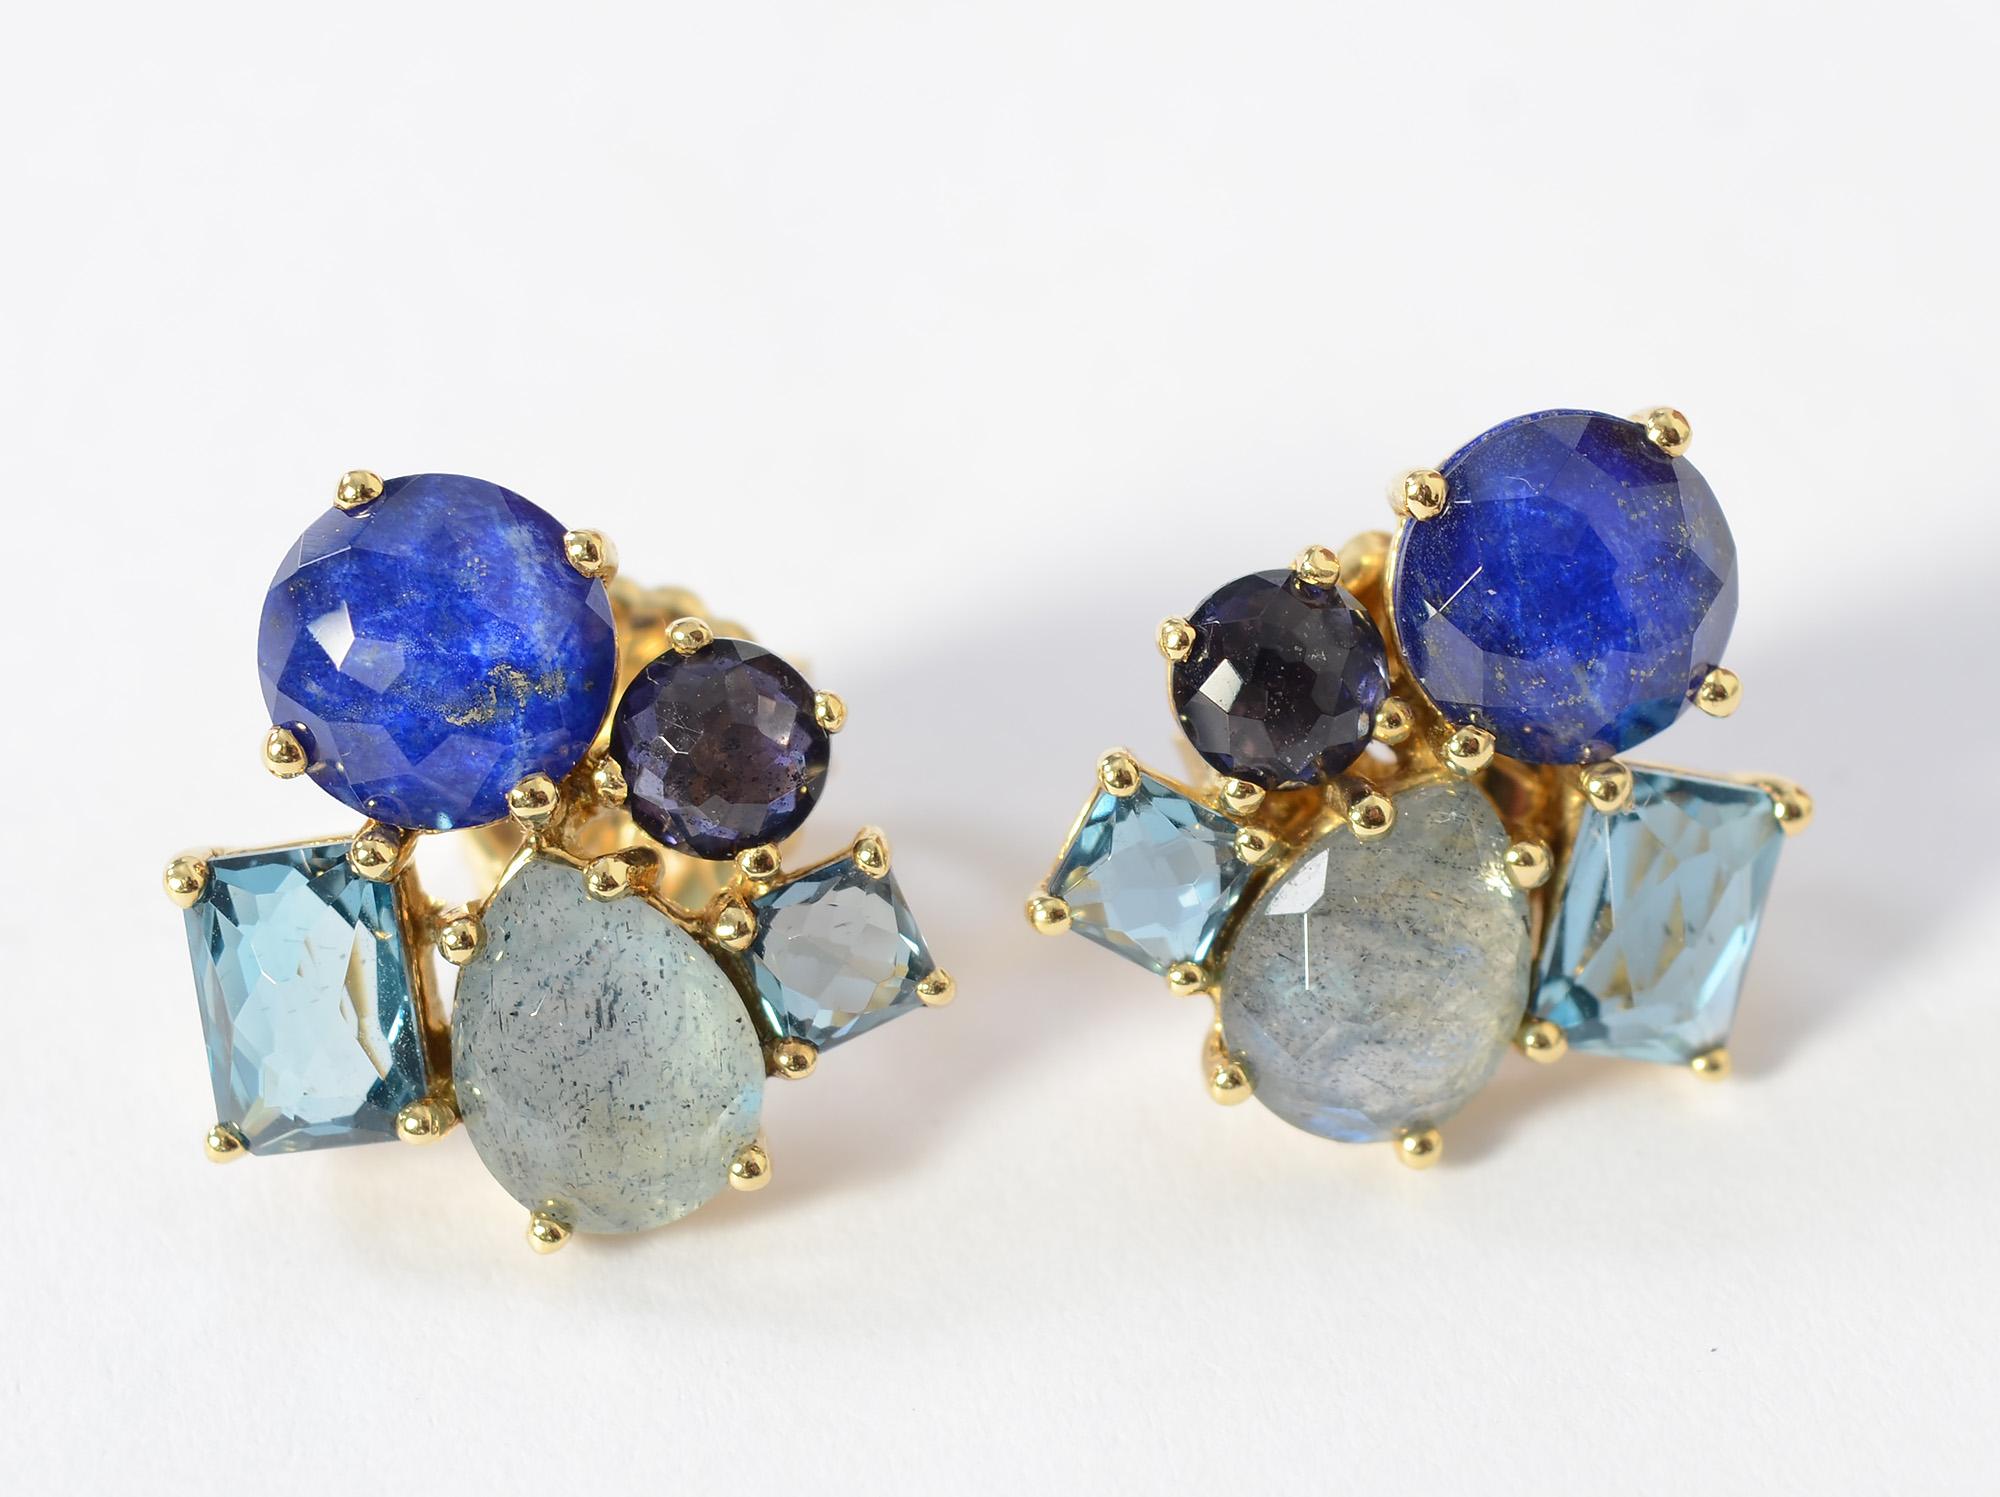 Ippolita cluster earrings with five different sizes and shapes of stones, all in beautiful shades of blue. The largest stone is feldspar; the others include blue topaz; aquamarine and  tanzanite.  The earrings  are part of Ippolita's Rock Candy